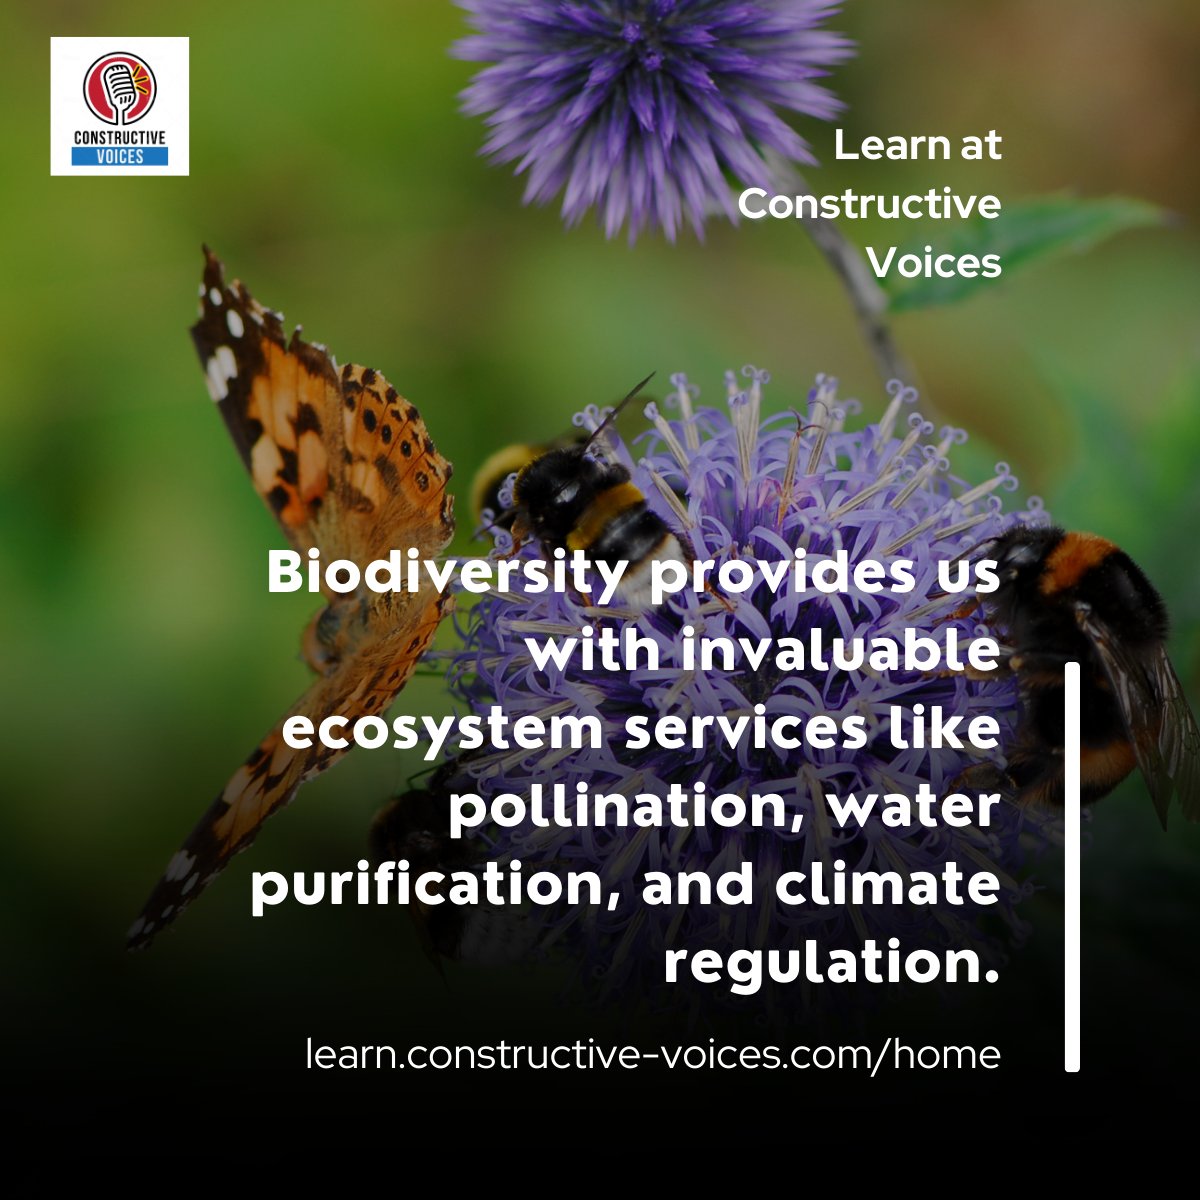 'Biodiversity provides us with invaluable ecosystem services like pollination, water purification, and climate regulation.' #biodiversity #biodiversitynetgain #training - learn.constructive-voices.com/home/